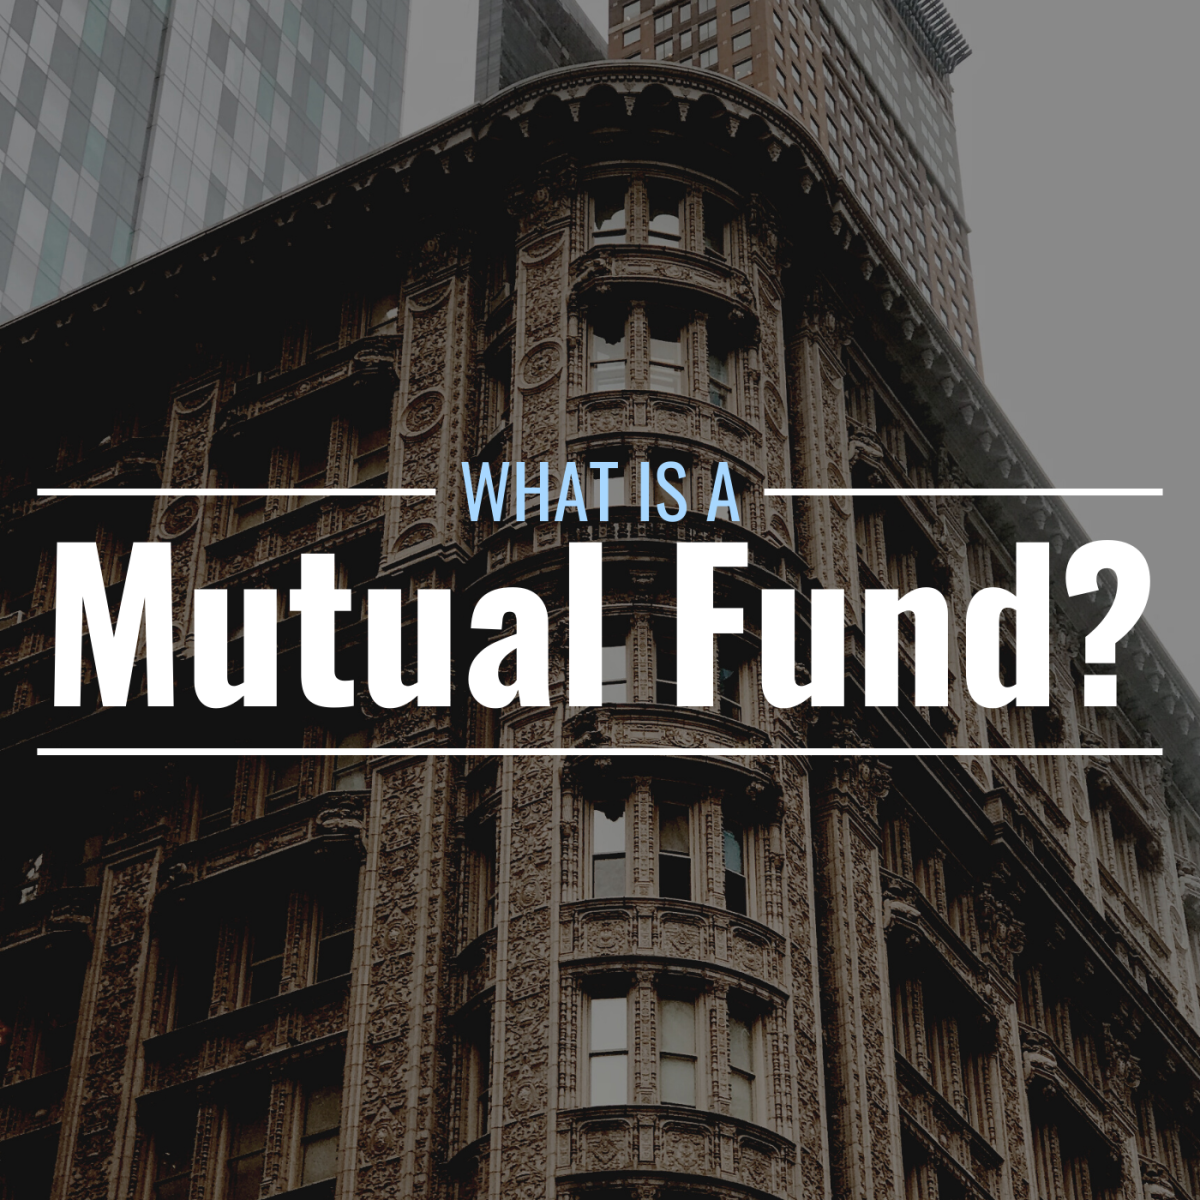 Darkened photo of a tall building in New York with text overlay that reads "What Is a Mutual Fund?"